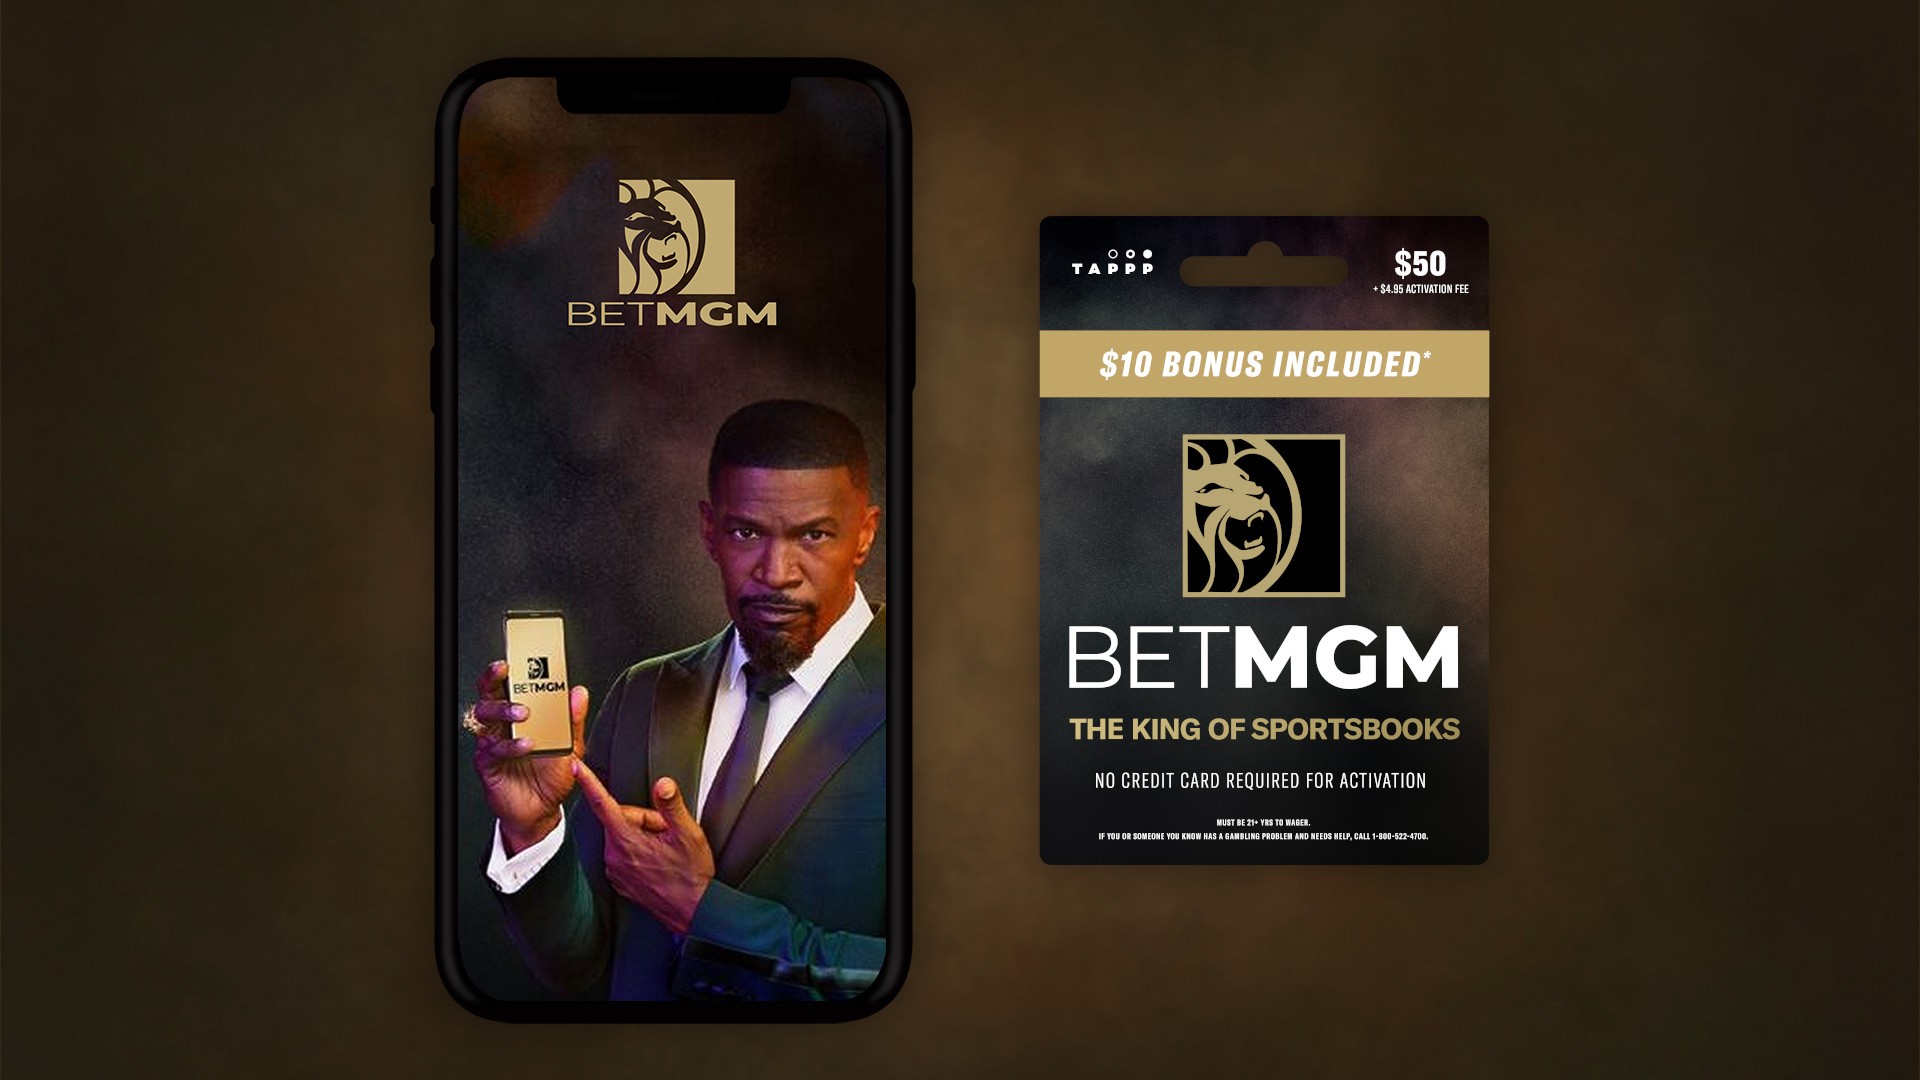 BetMGM and startup partner TAPPP to double gift card distribution network